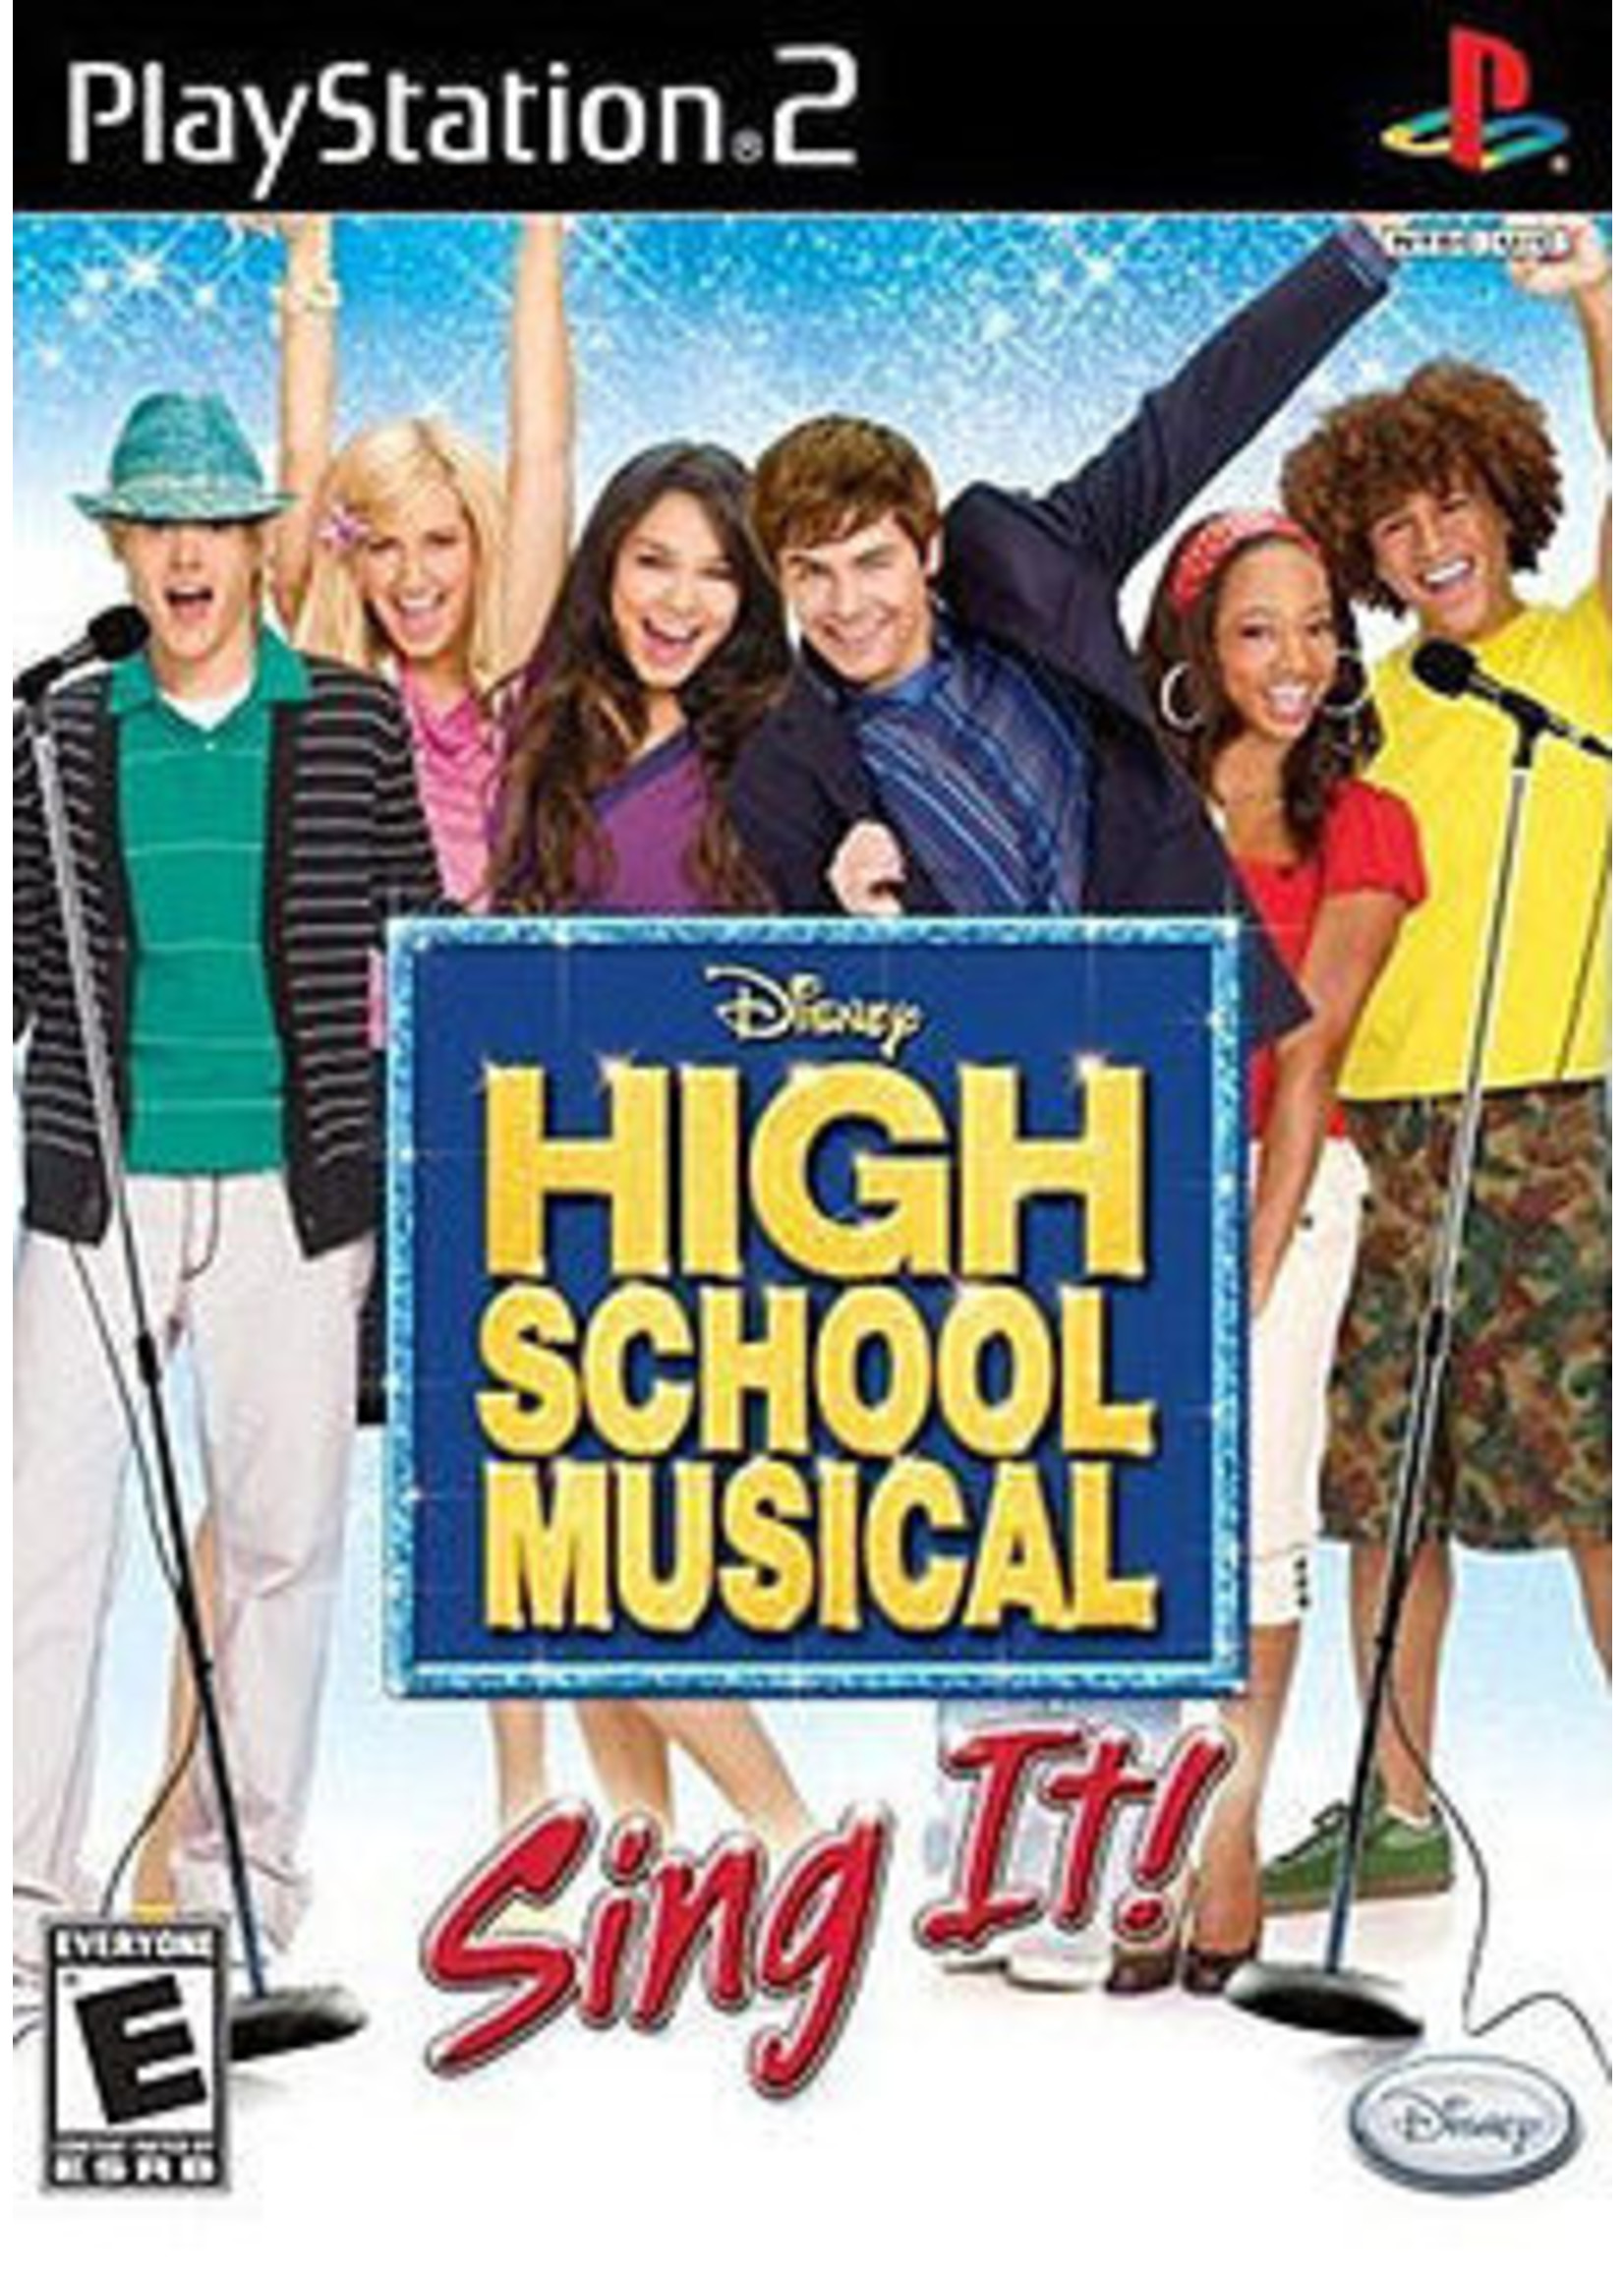 Sony Playstation 2 (PS2) High School Musical Sing It